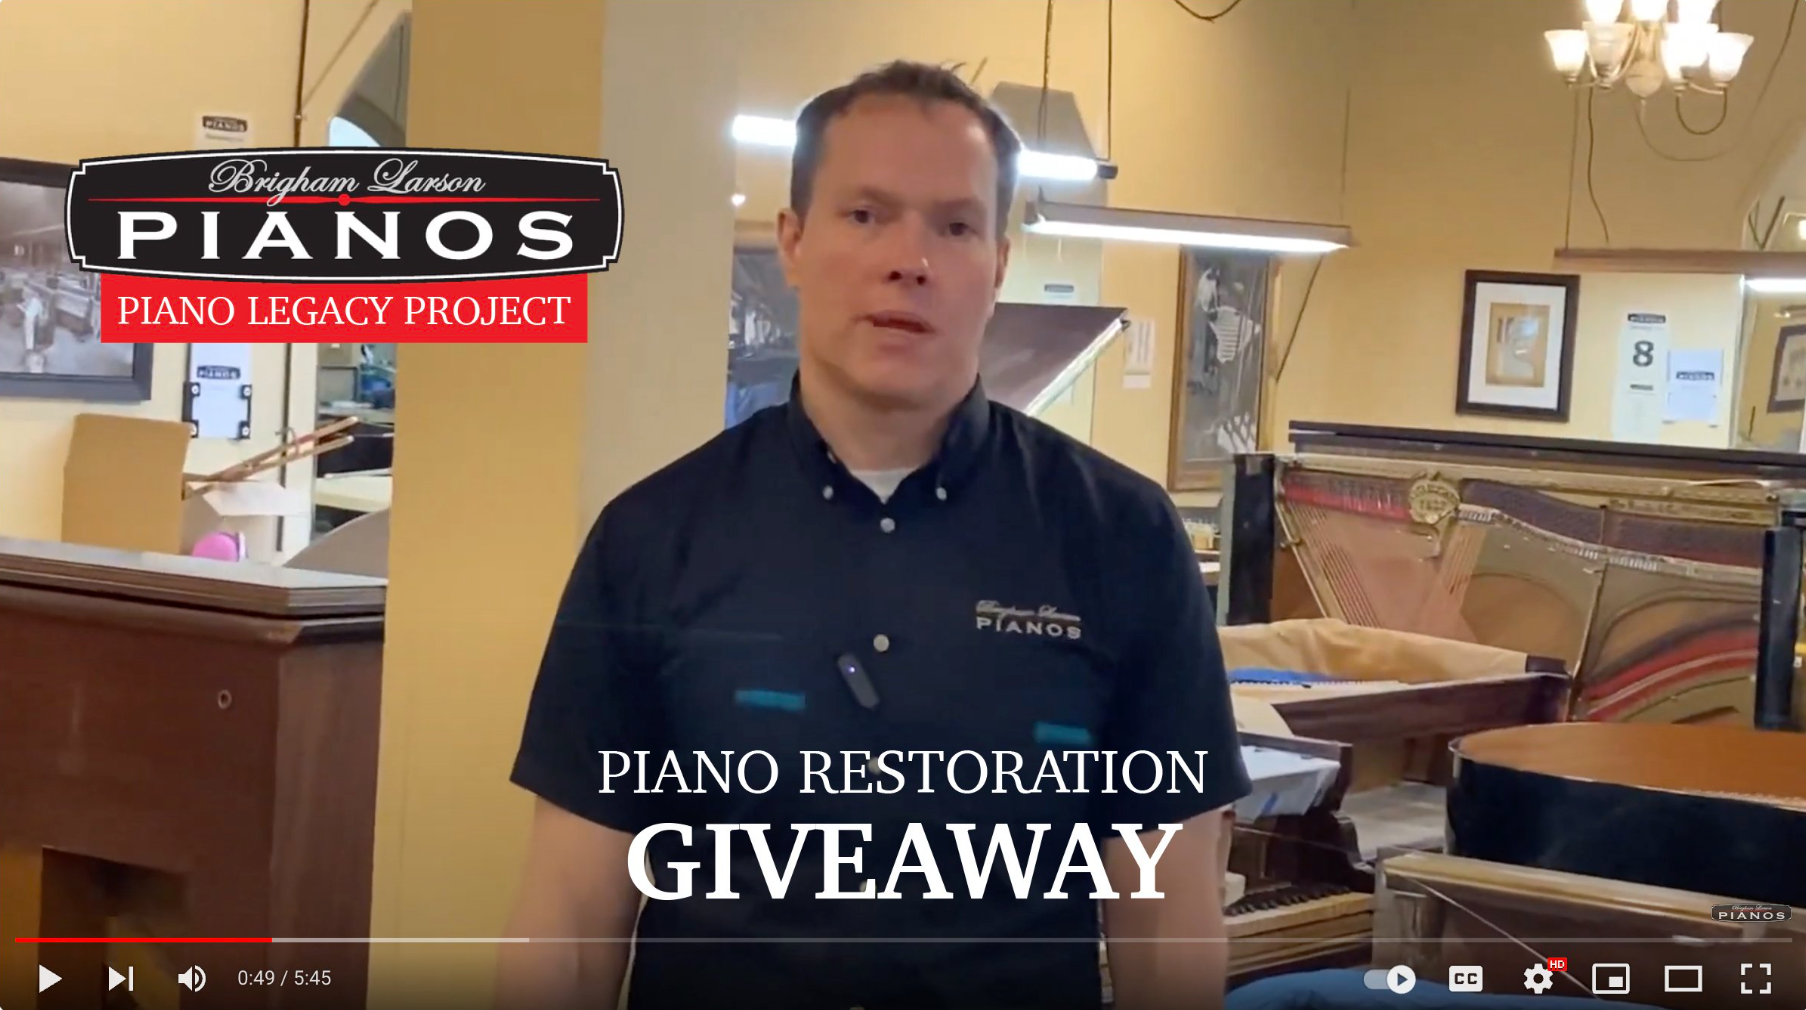 Load video: Brigham Larson tells details of how to win a FREE piano restoration.